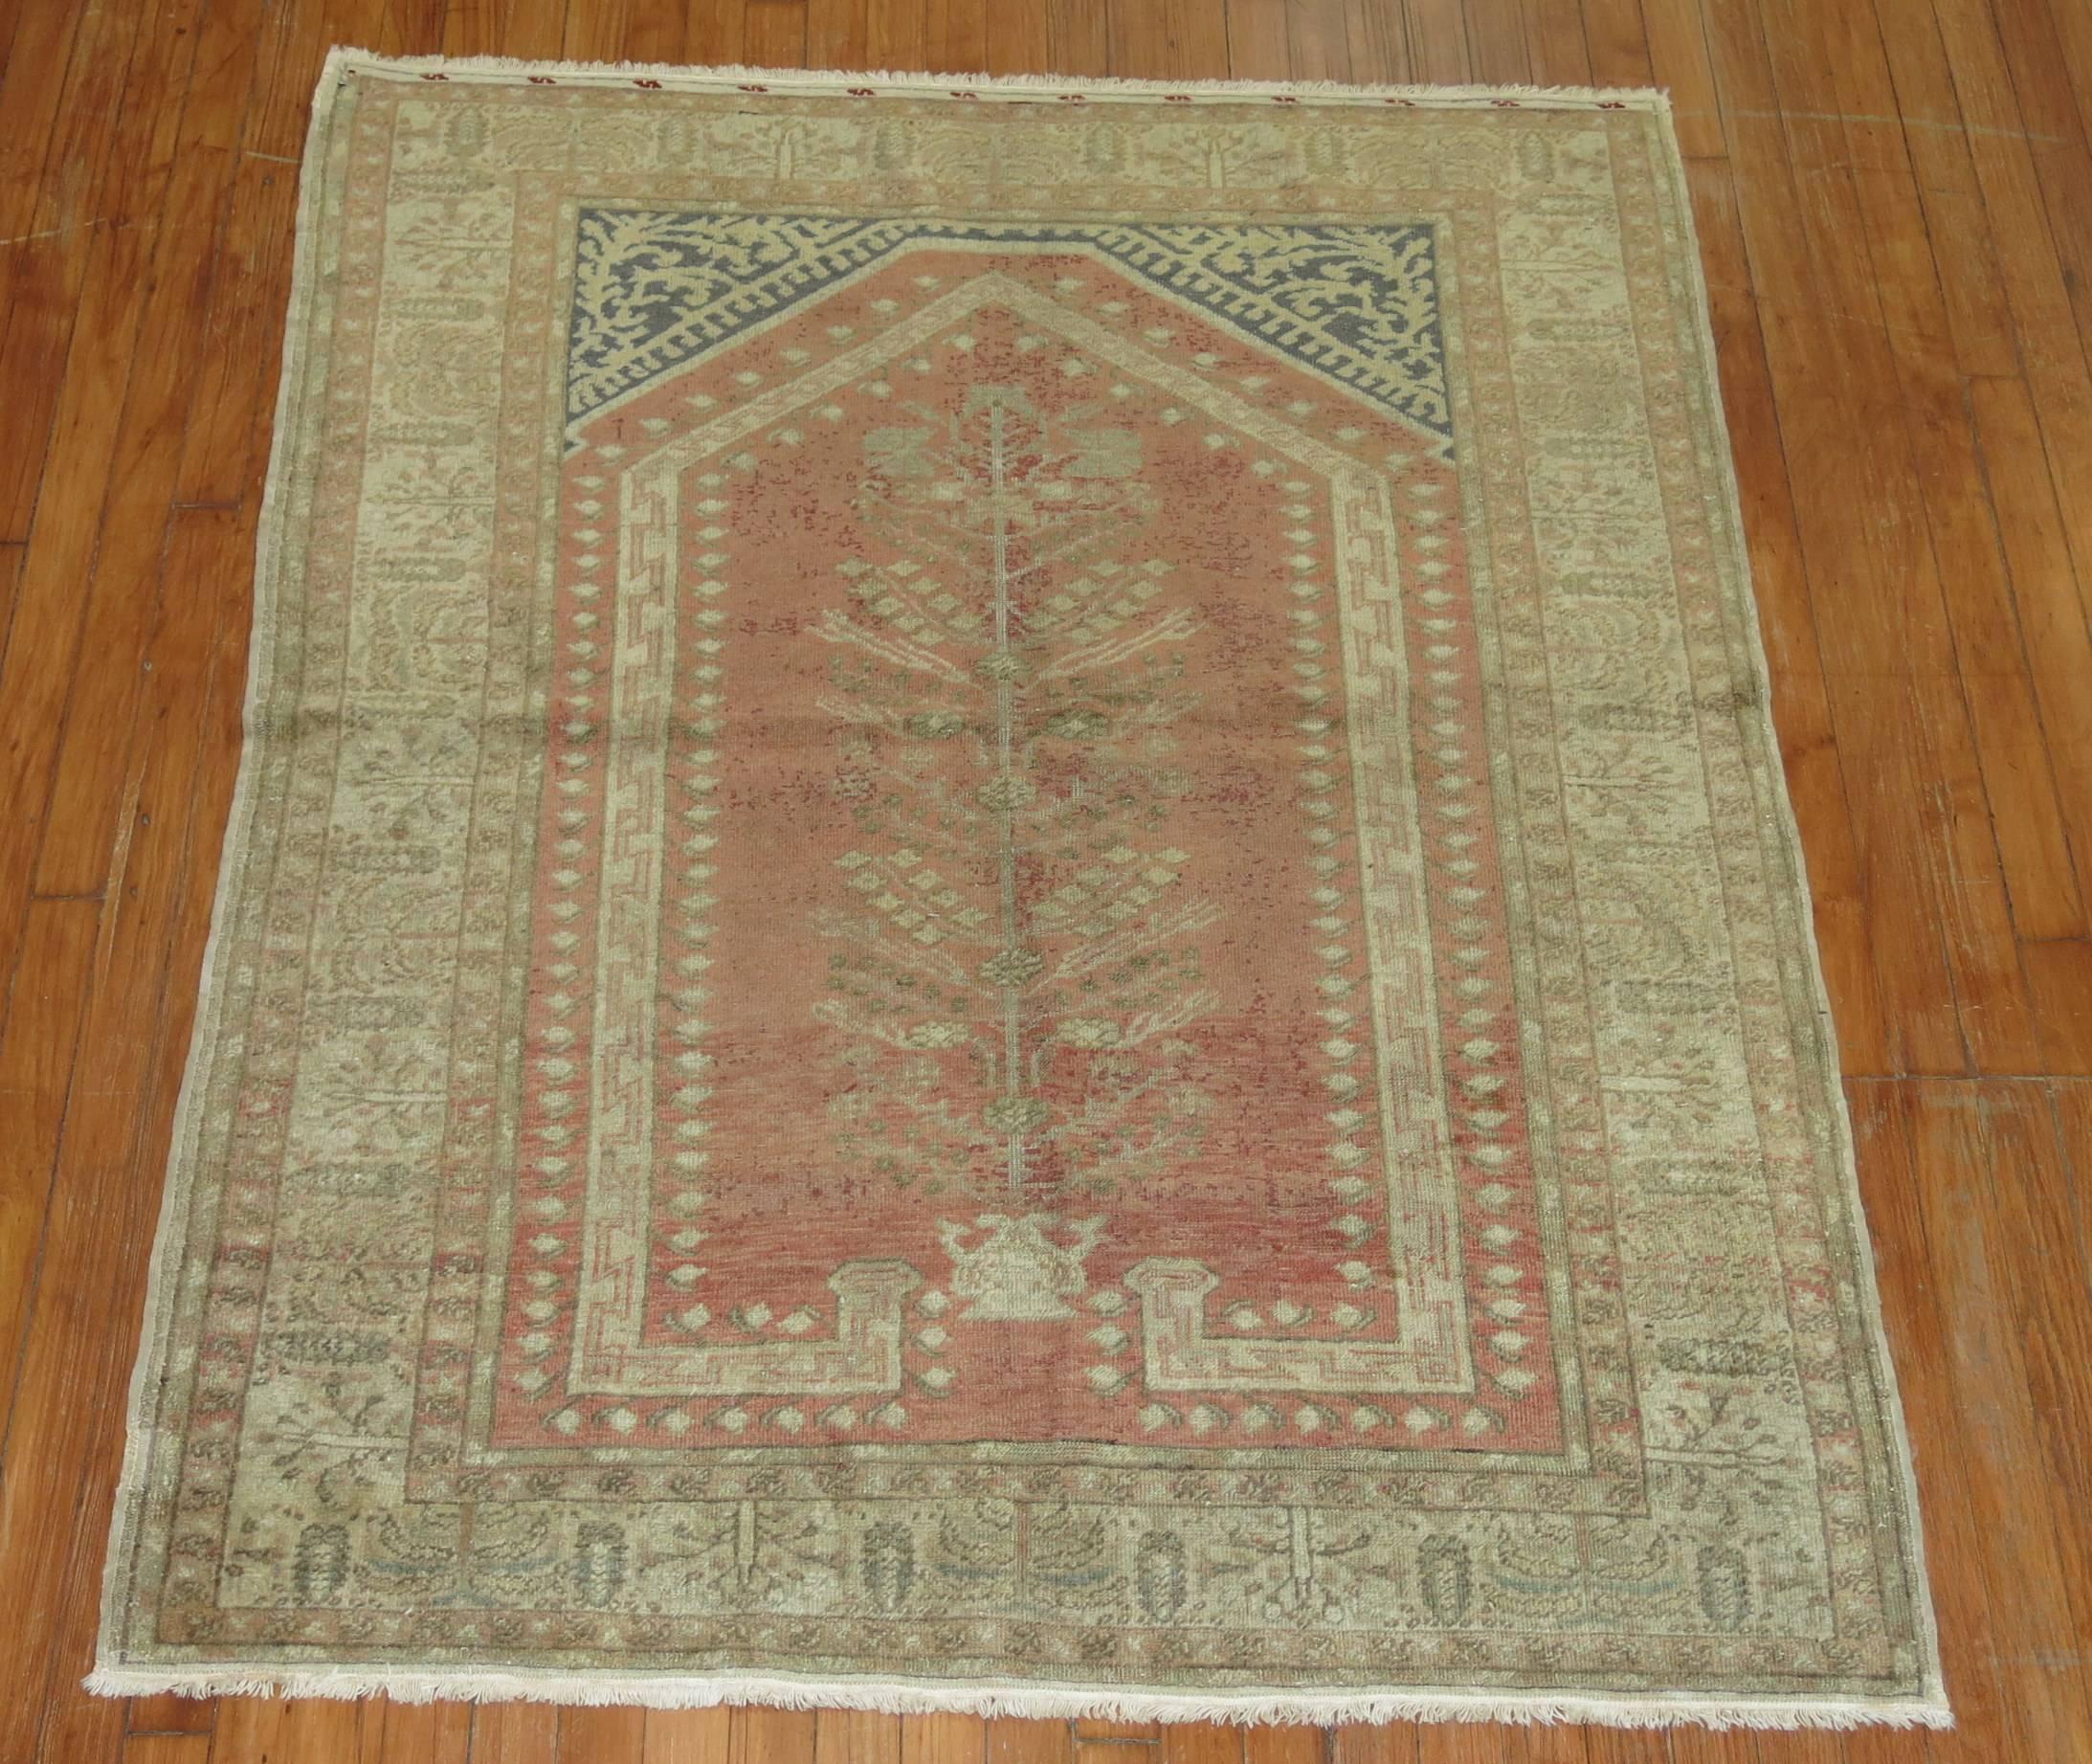 An early 20th century Turkish rug with a whimsical tree of life Directional motif.

4'2'' x 5'4''